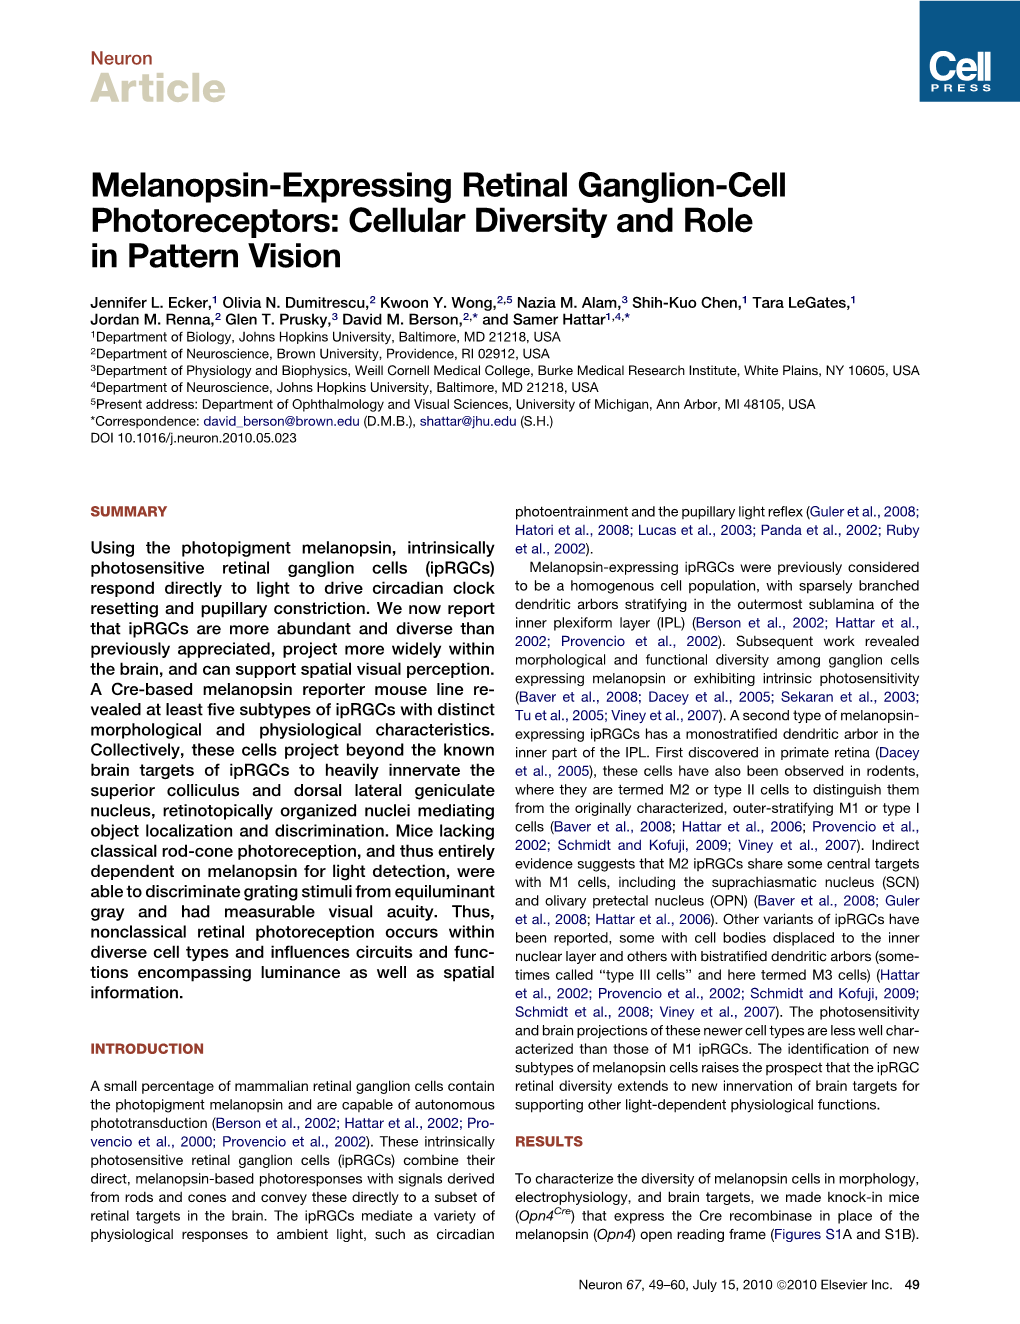 Melanopsin-Expressing Retinal Ganglion-Cell Photoreceptors: Cellular Diversity and Role in Pattern Vision